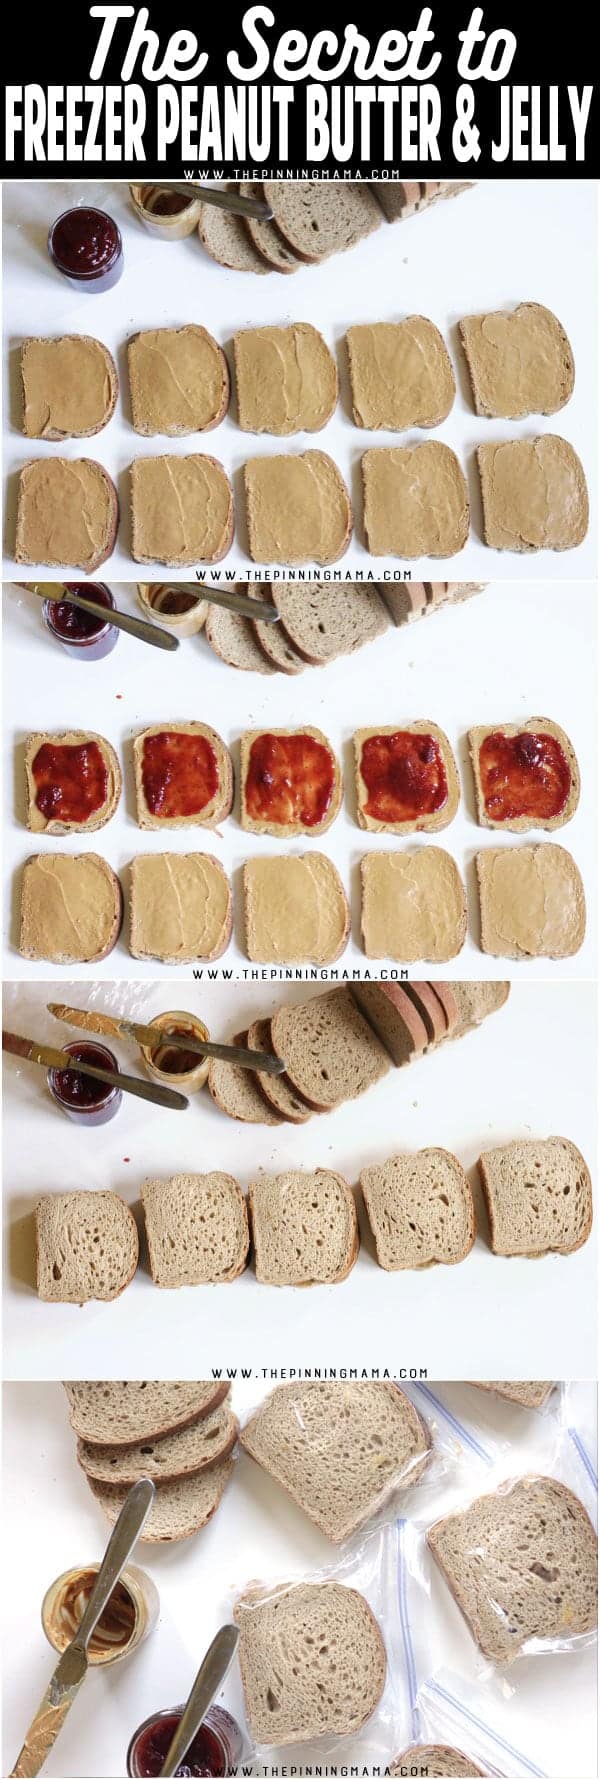 How to make freezer peanut butter and jelly sandwiches so they aren't soggy!! Great for prepping a weeks worth of lunches at a time to save time and stress in the mornings! I can do this for school and work lunches!